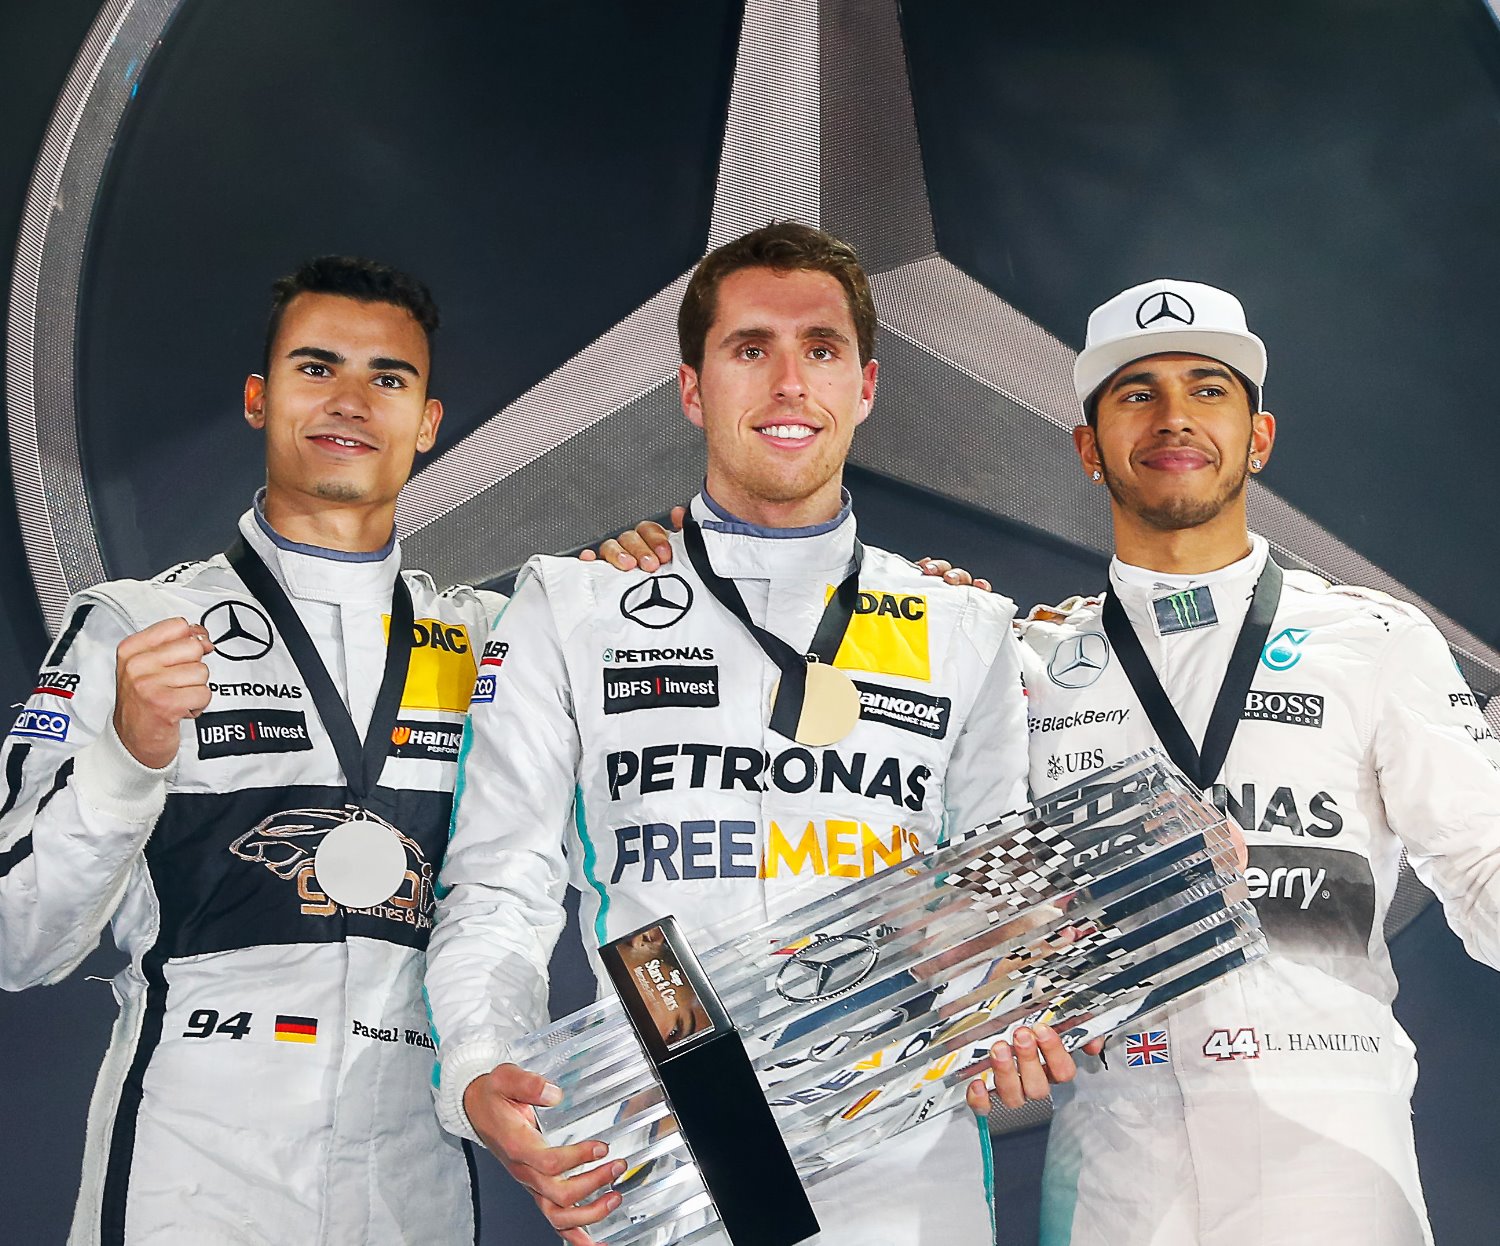 (L to R) Wehlein (2nd), Juncadella (1st), and Hamilton (3rd)